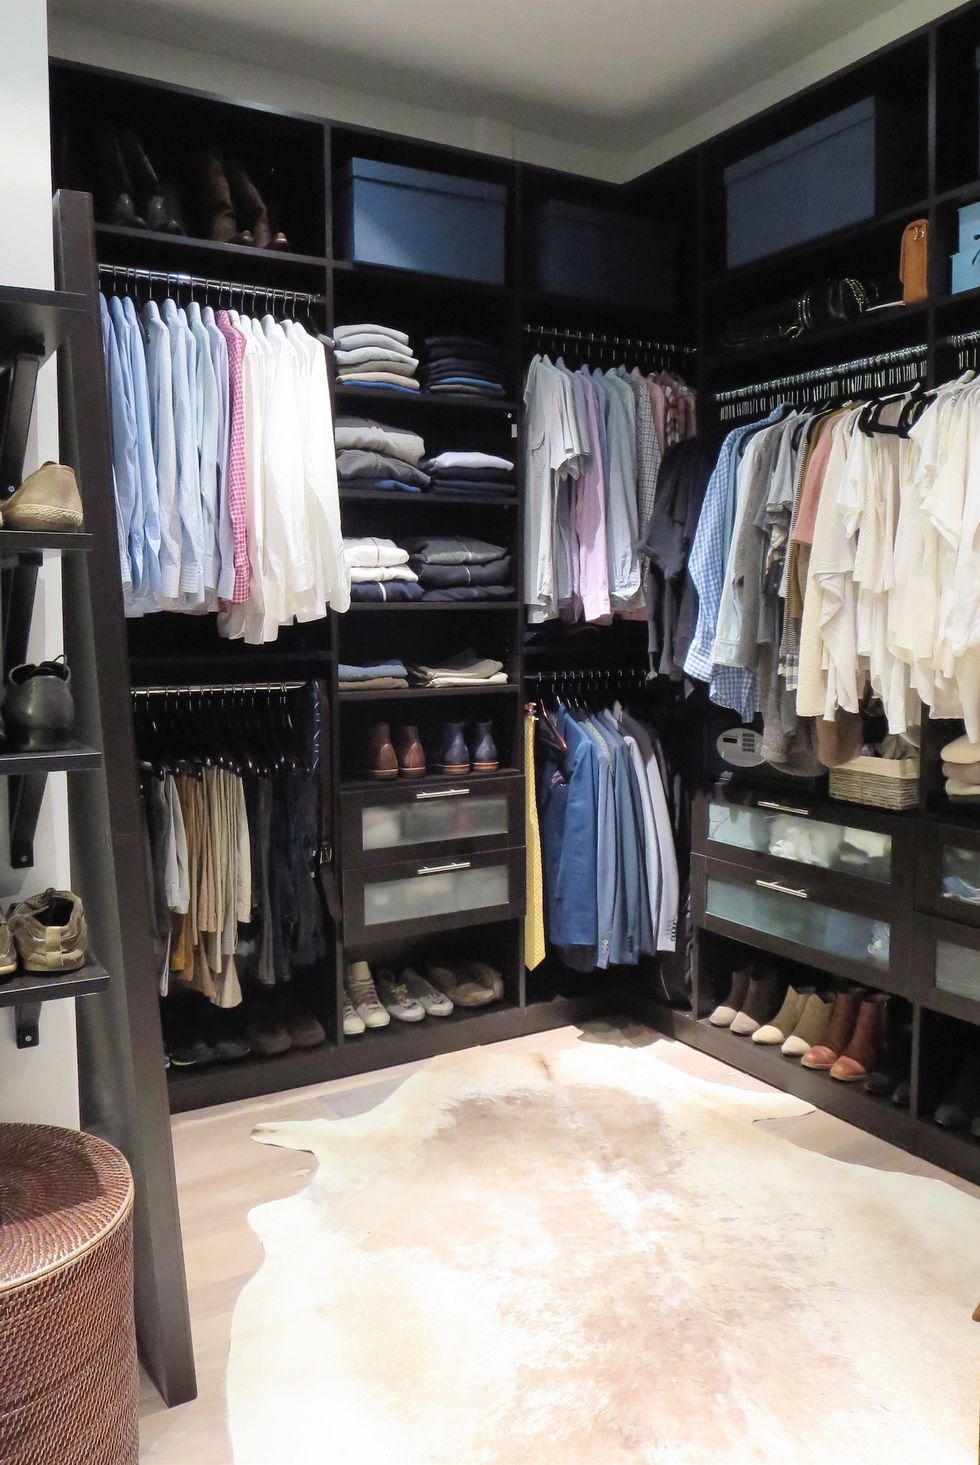 Best Ways To Organize Closets According To Experts